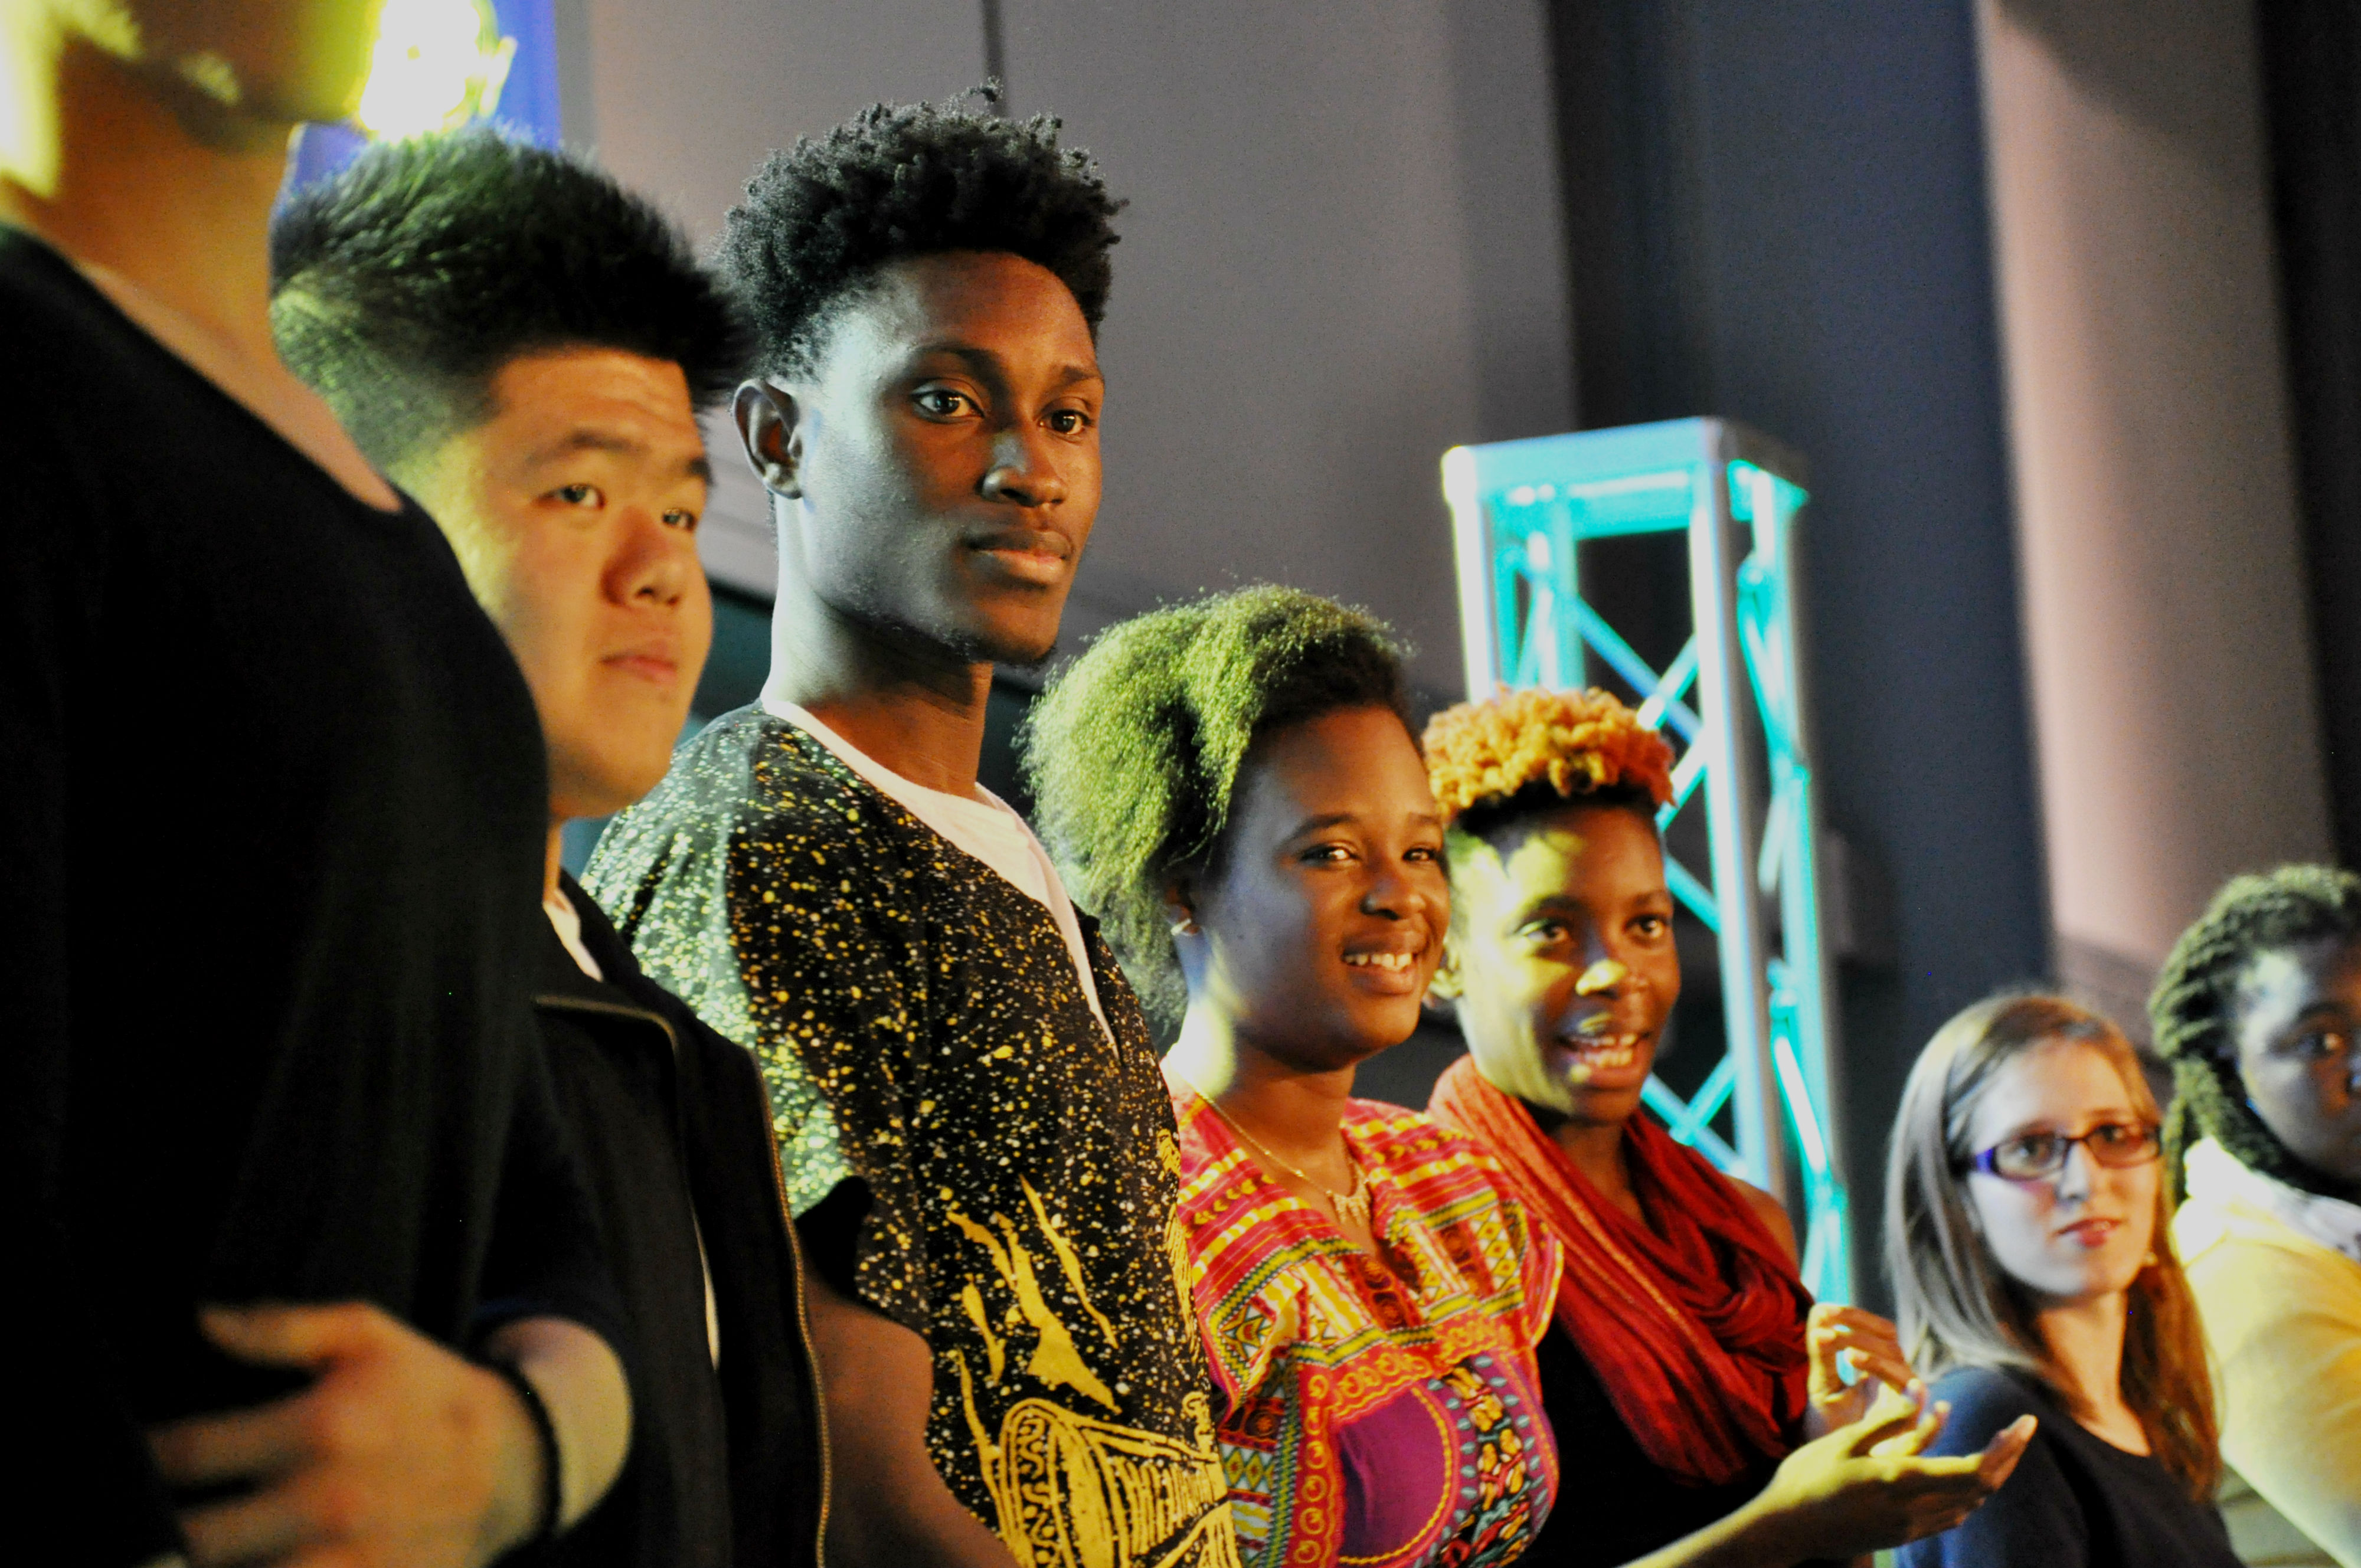 Students stand on stage at a multicultural event